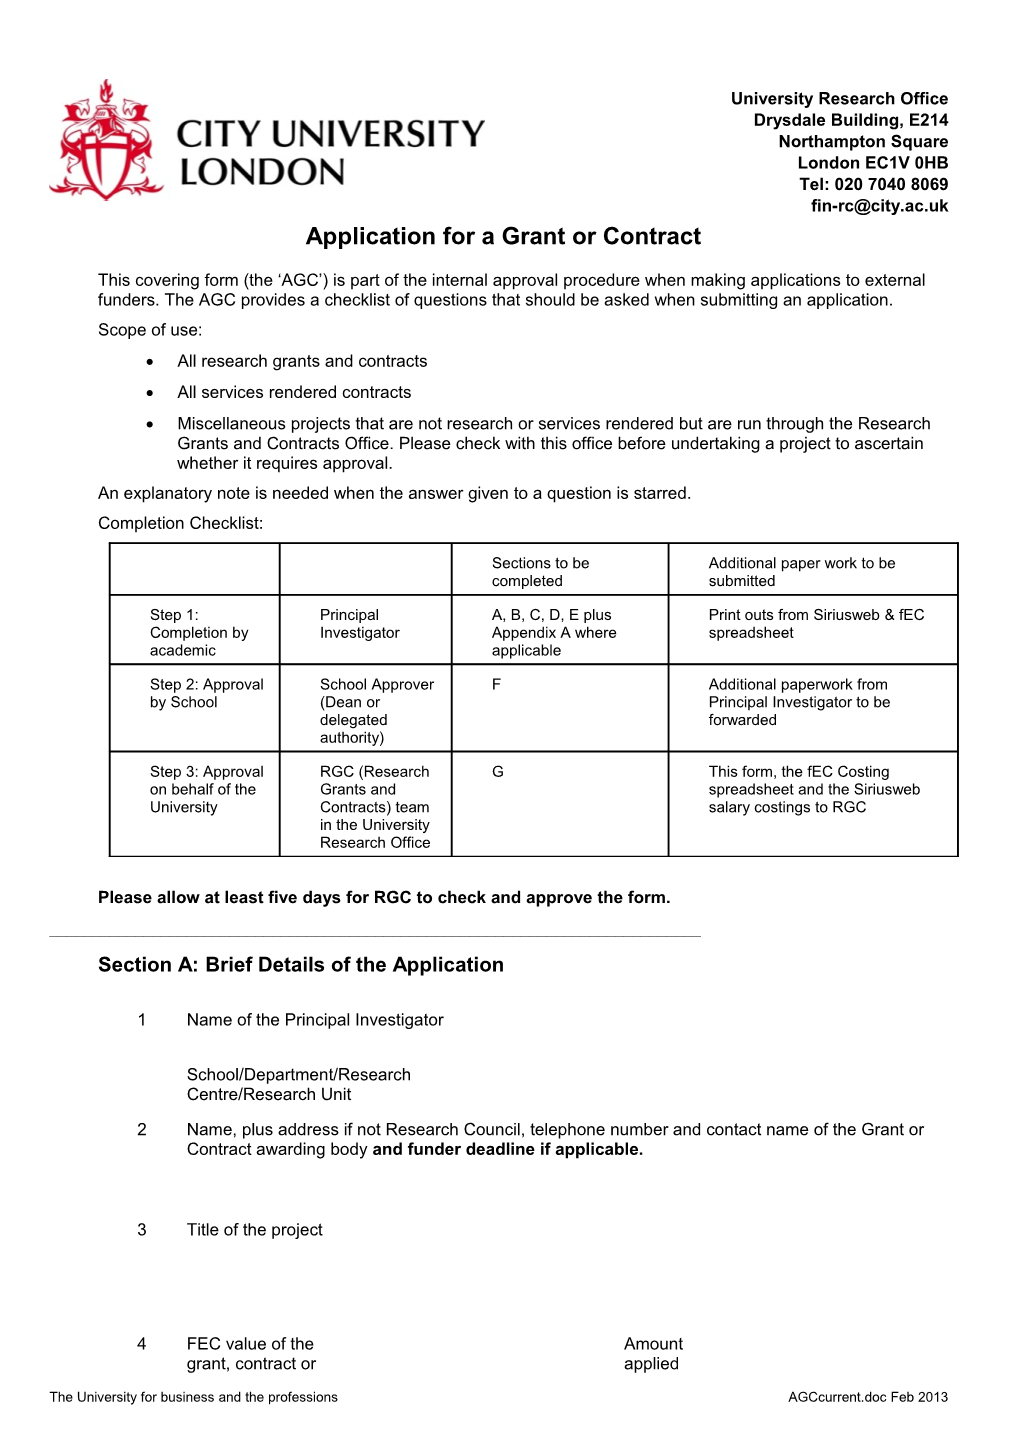 Application for a Grant Or Contract